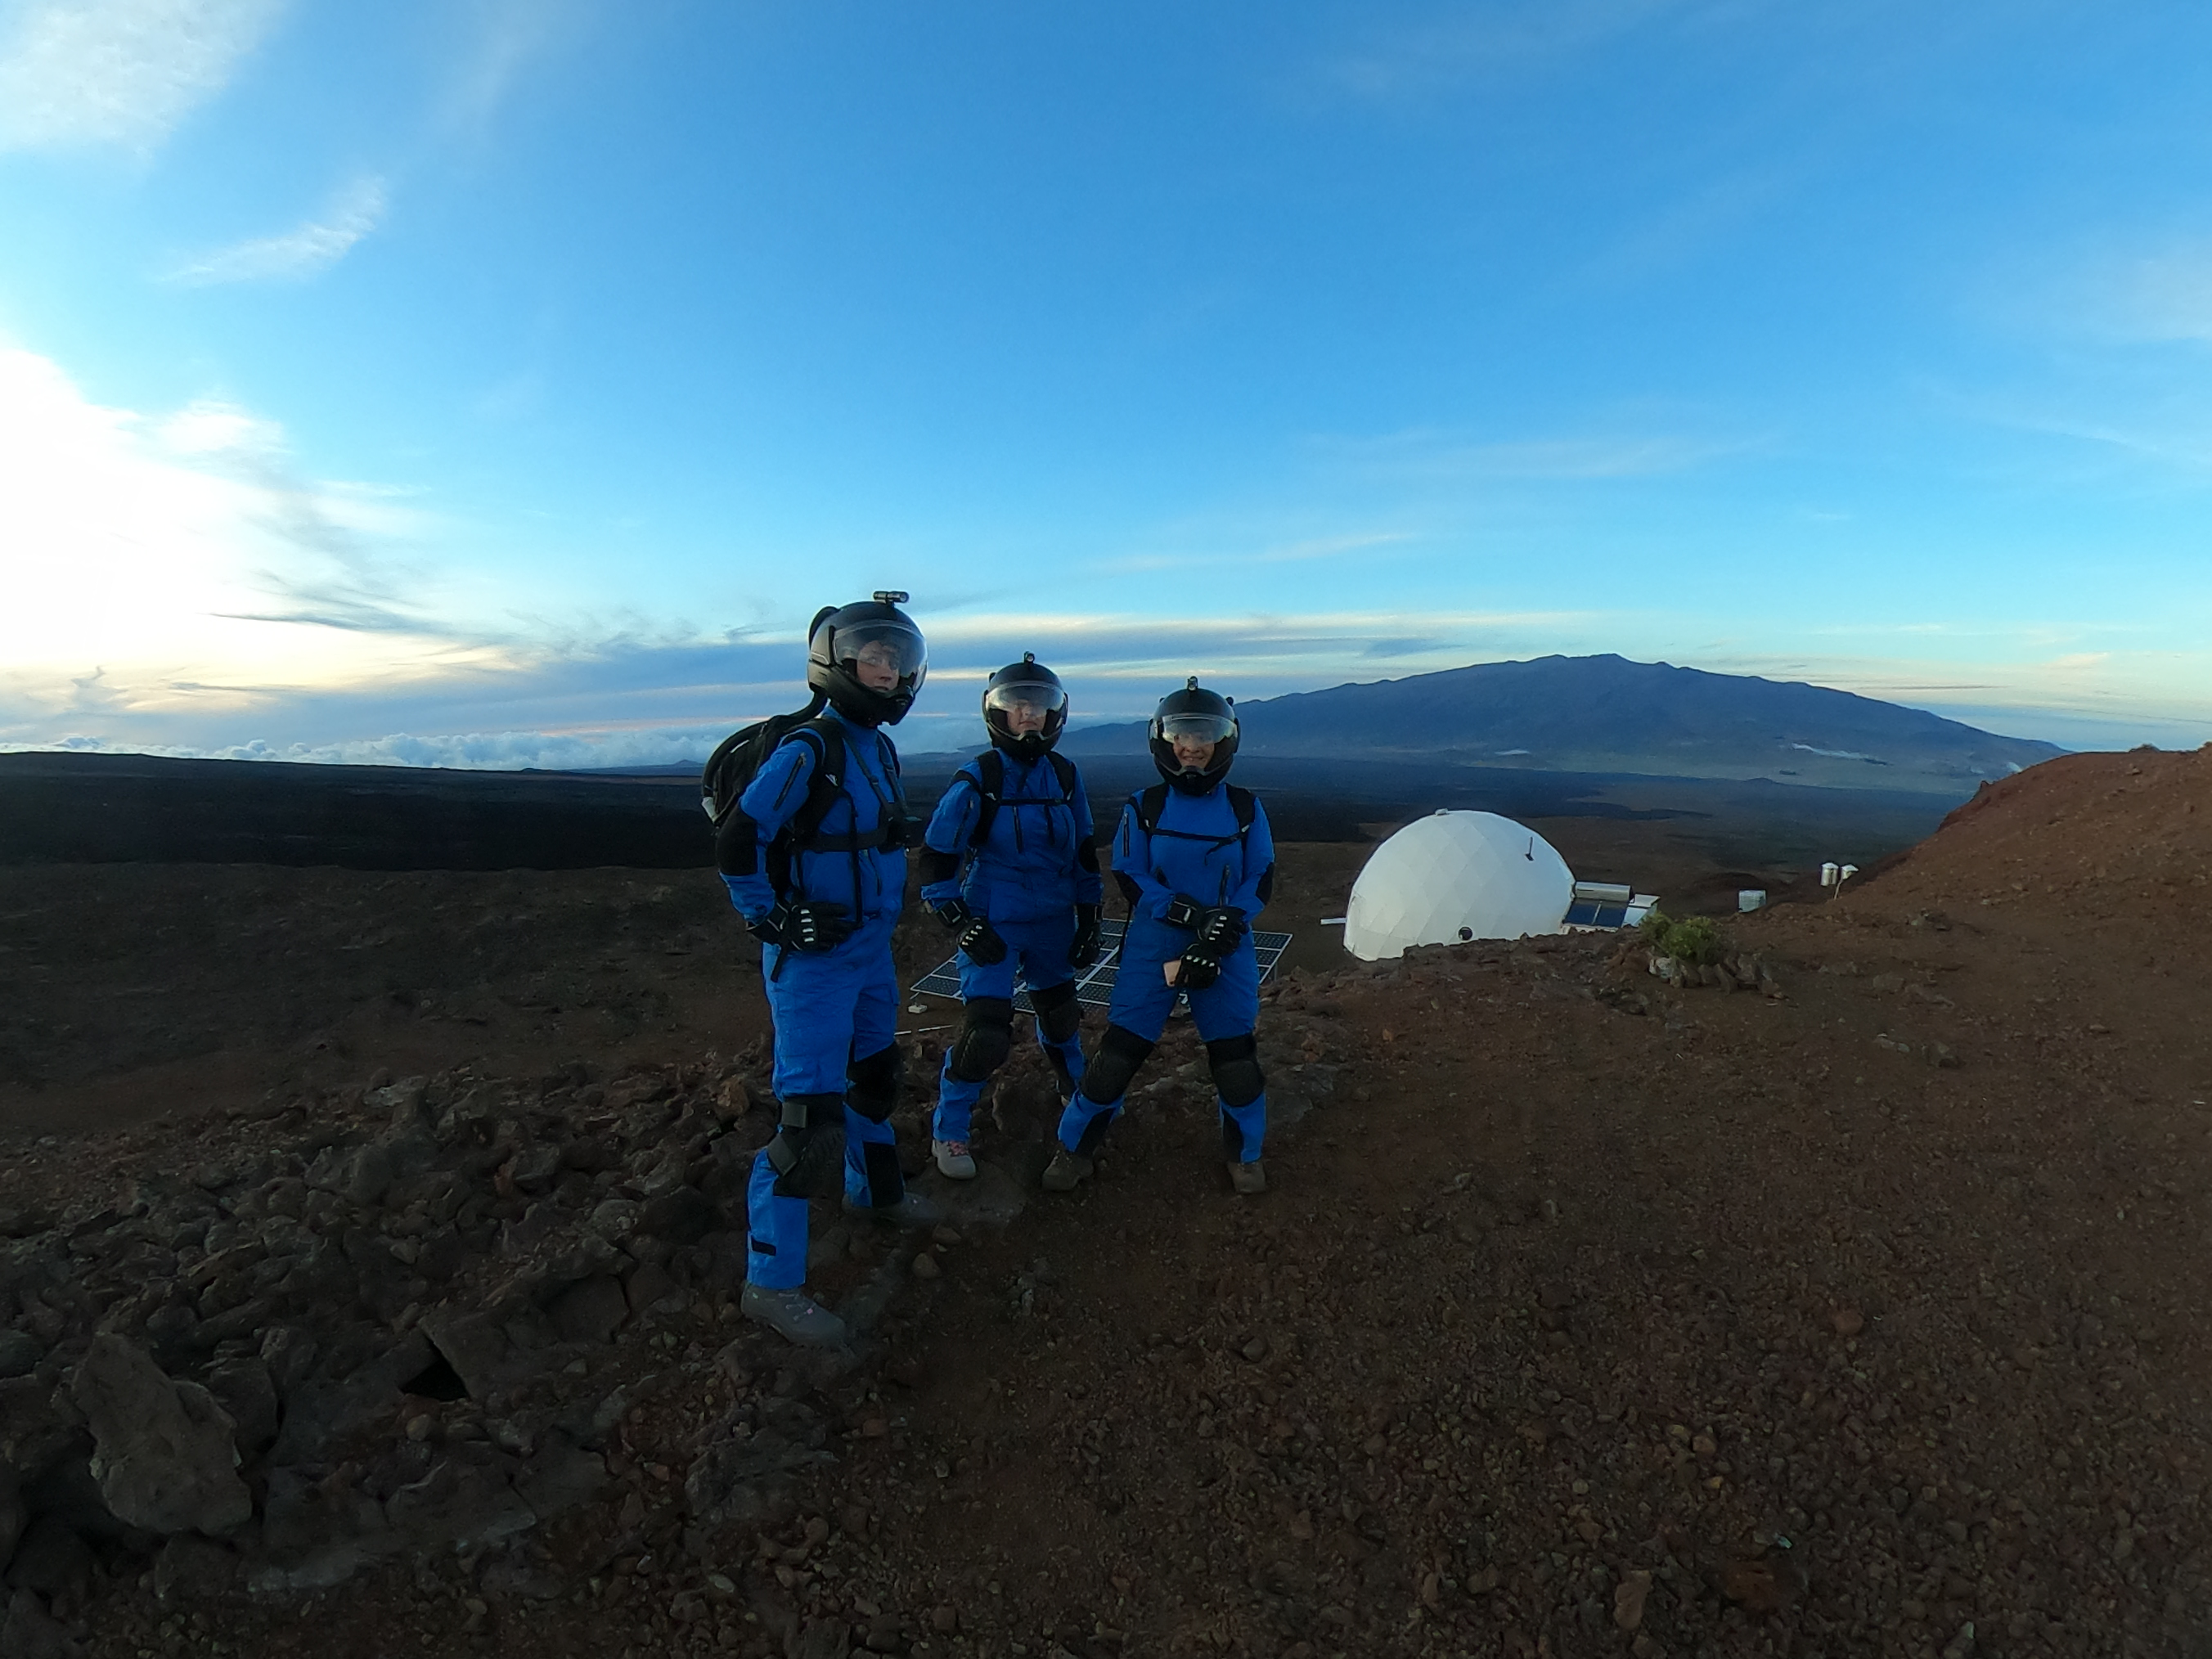 Space.com's Chelsea Gohd takes her first Marswalk with the crew of Sensoria 2 at the HI-SEAS Mars analog habitat in Hawaii on Nov. 5, 2020.